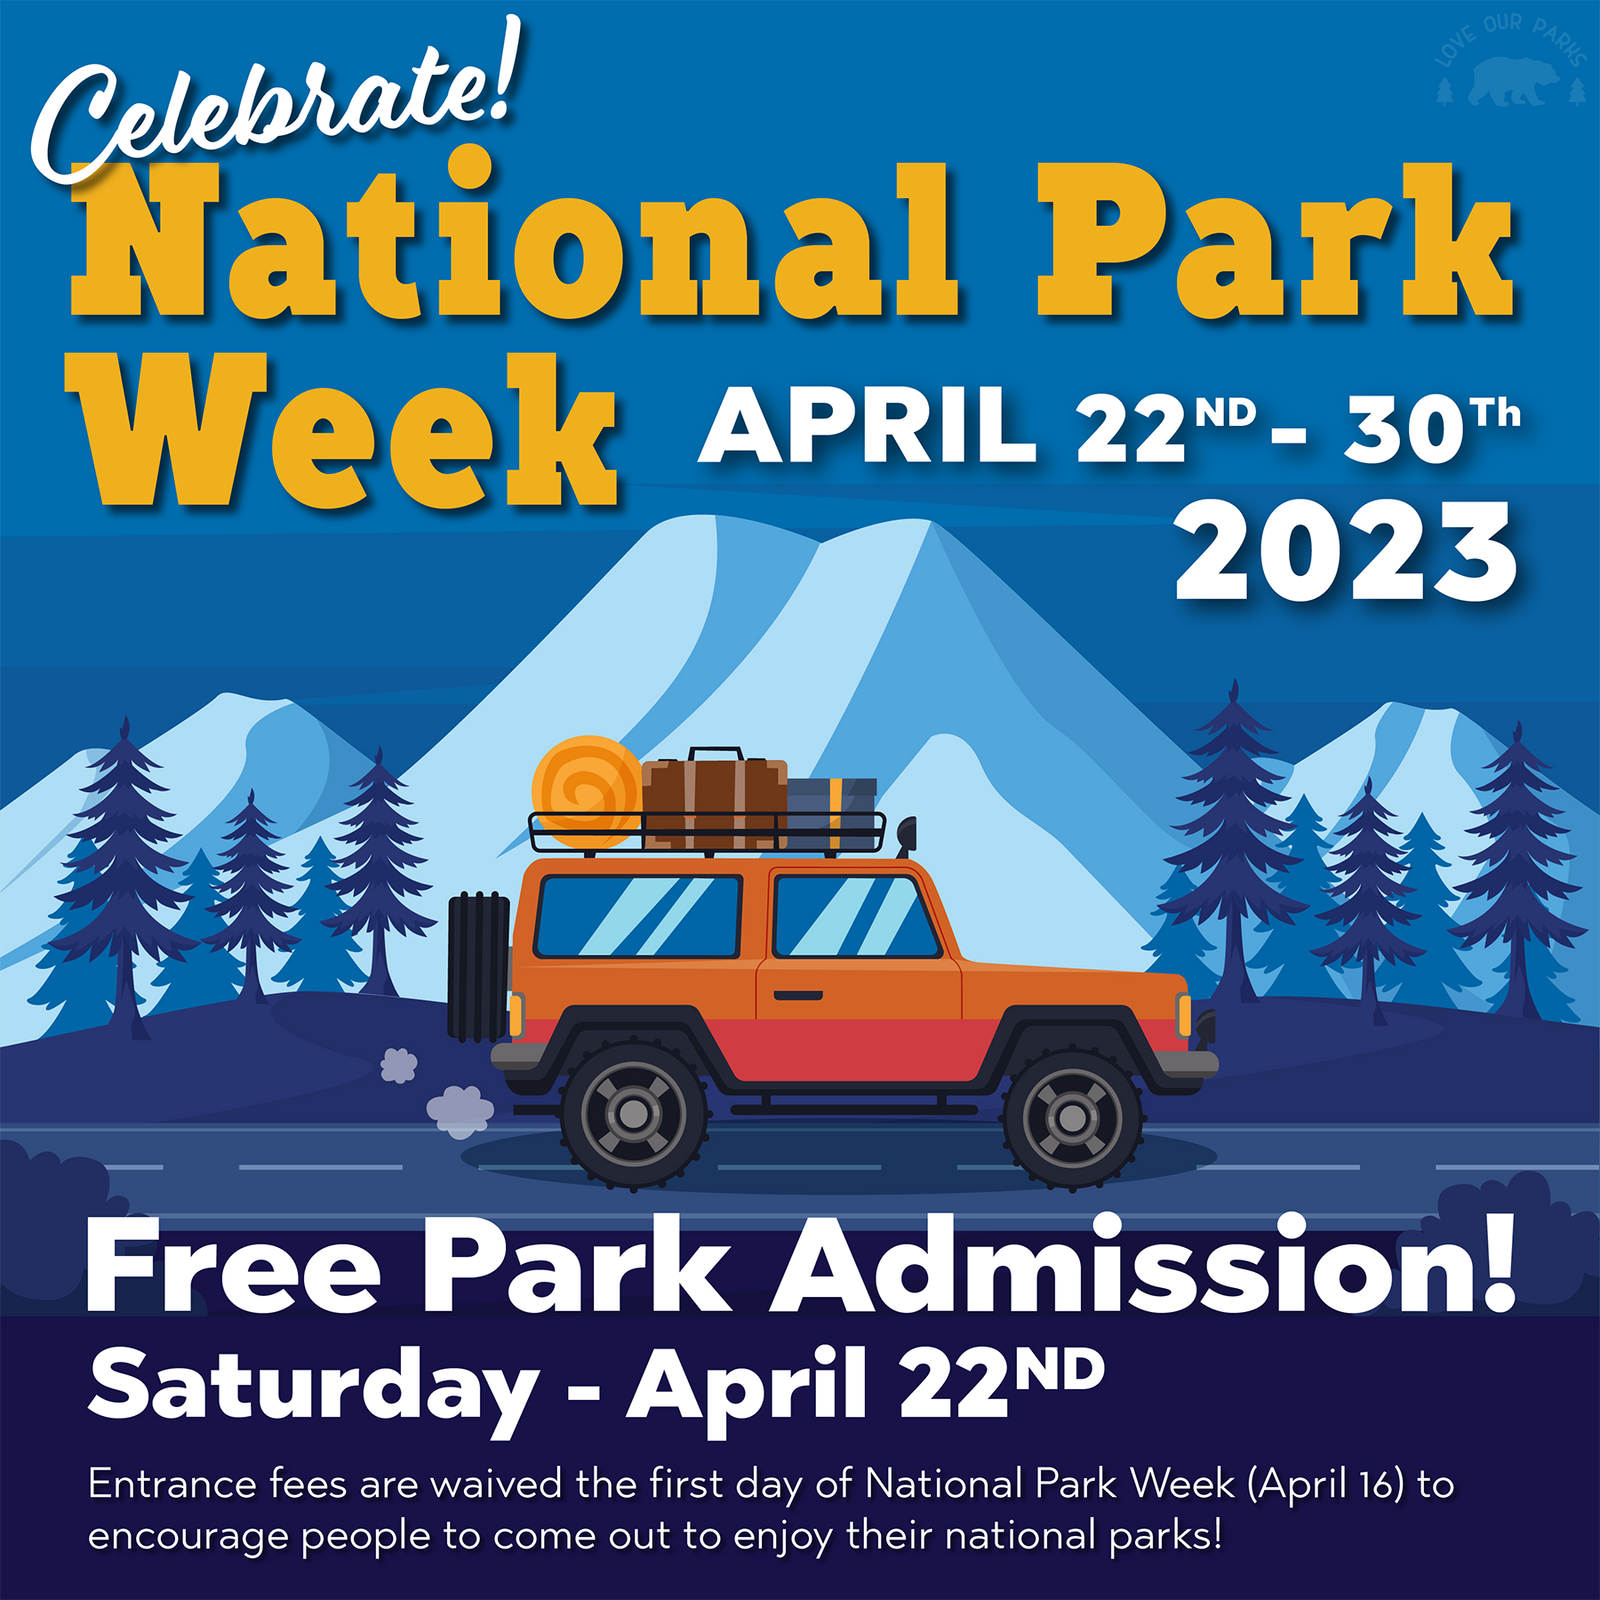 Celebrate National Park Week from April 22nd to 30th, 2023